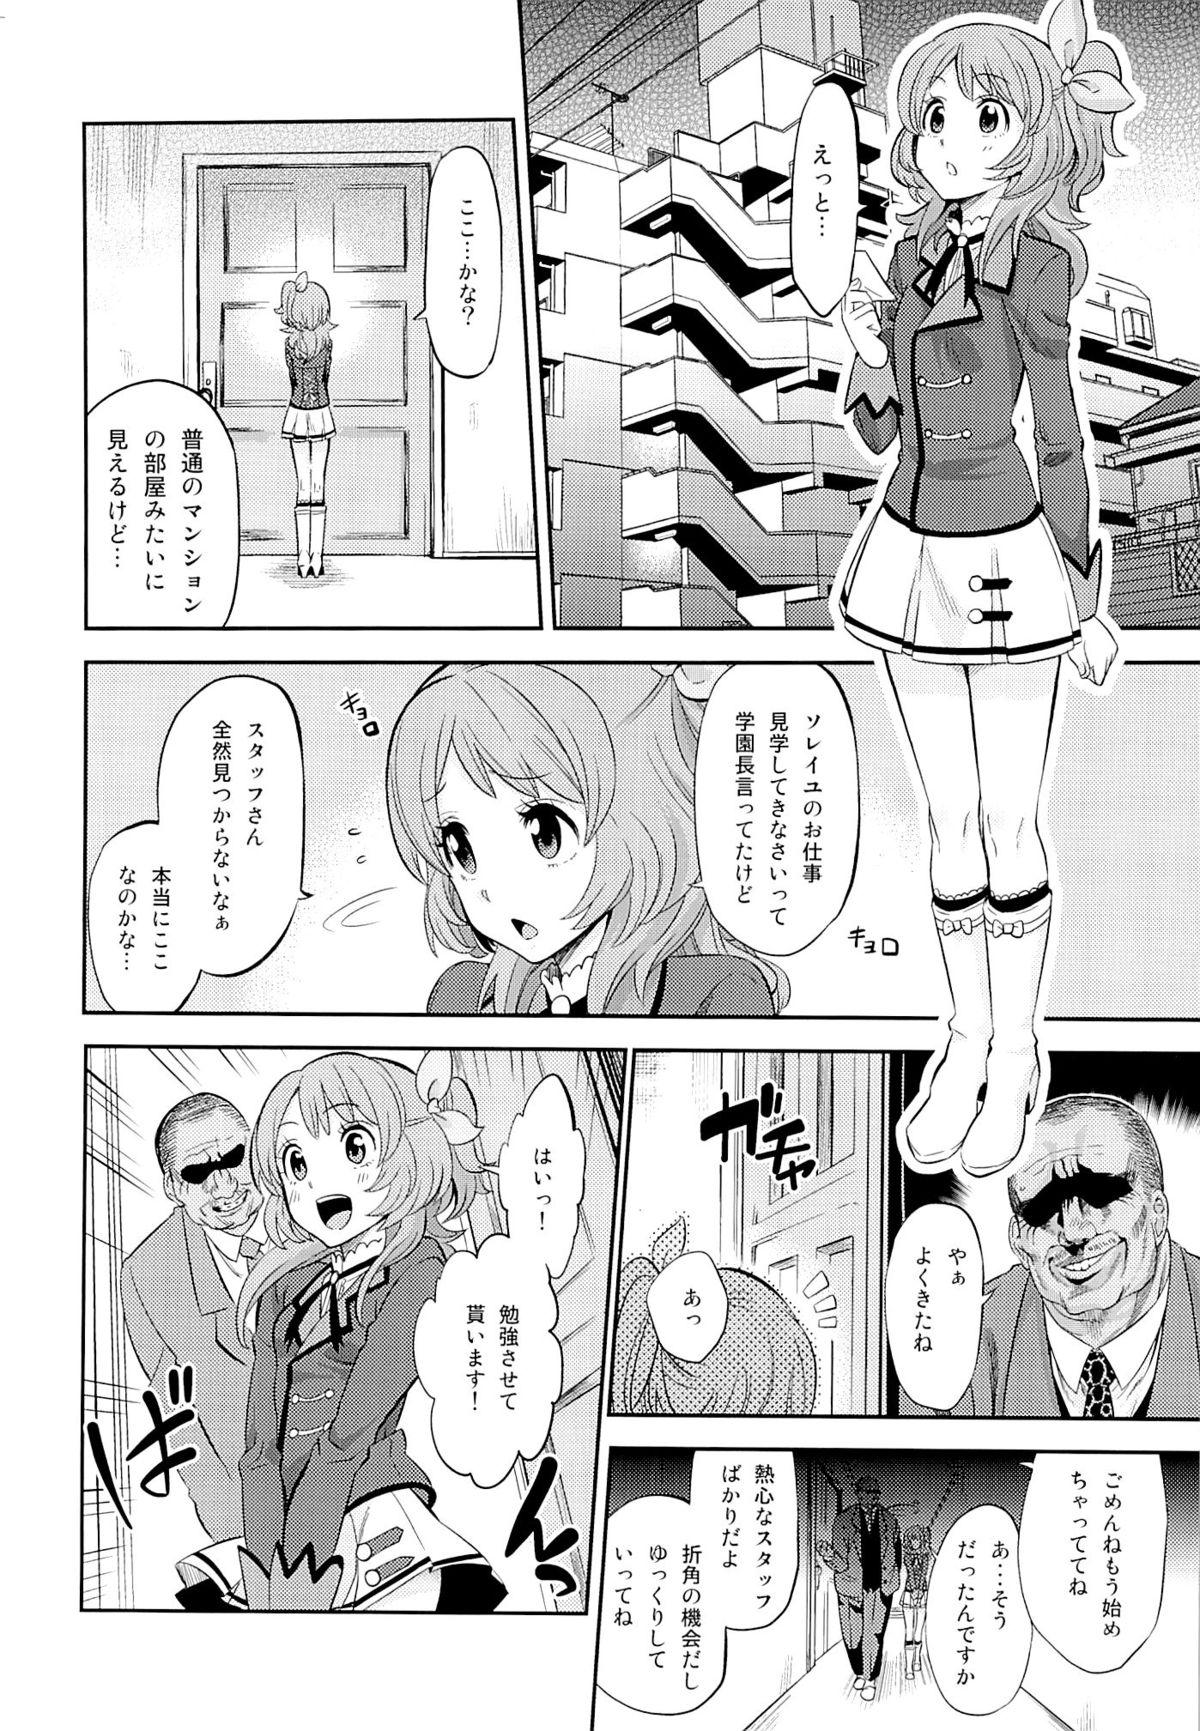 3way IT WAS A good EXPERiENCE - Aikatsu Perverted - Page 3